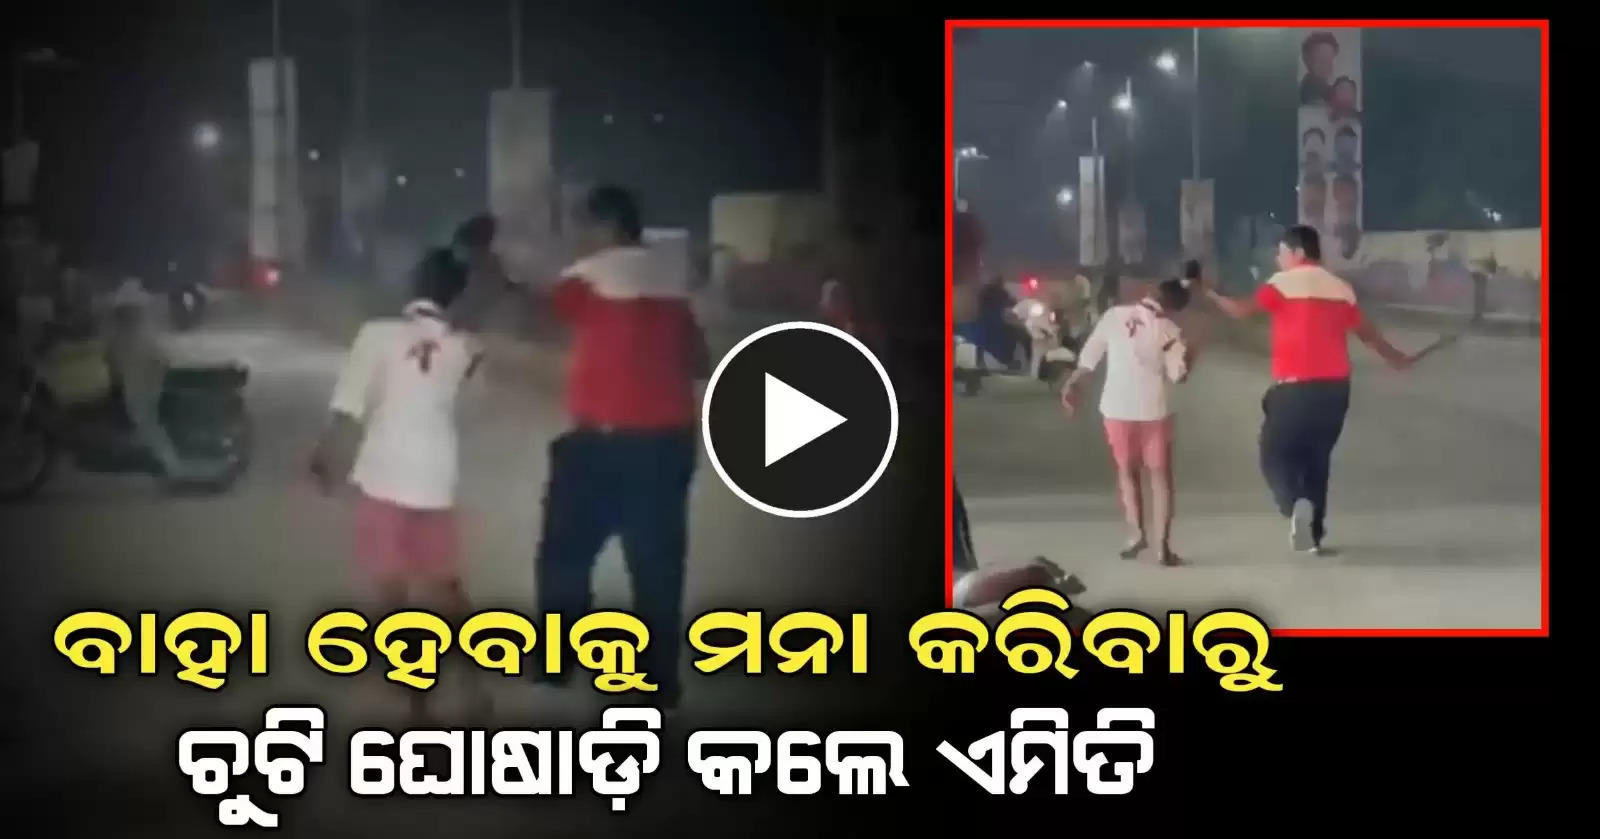 This man drags minor girl in street road with sharp weapon